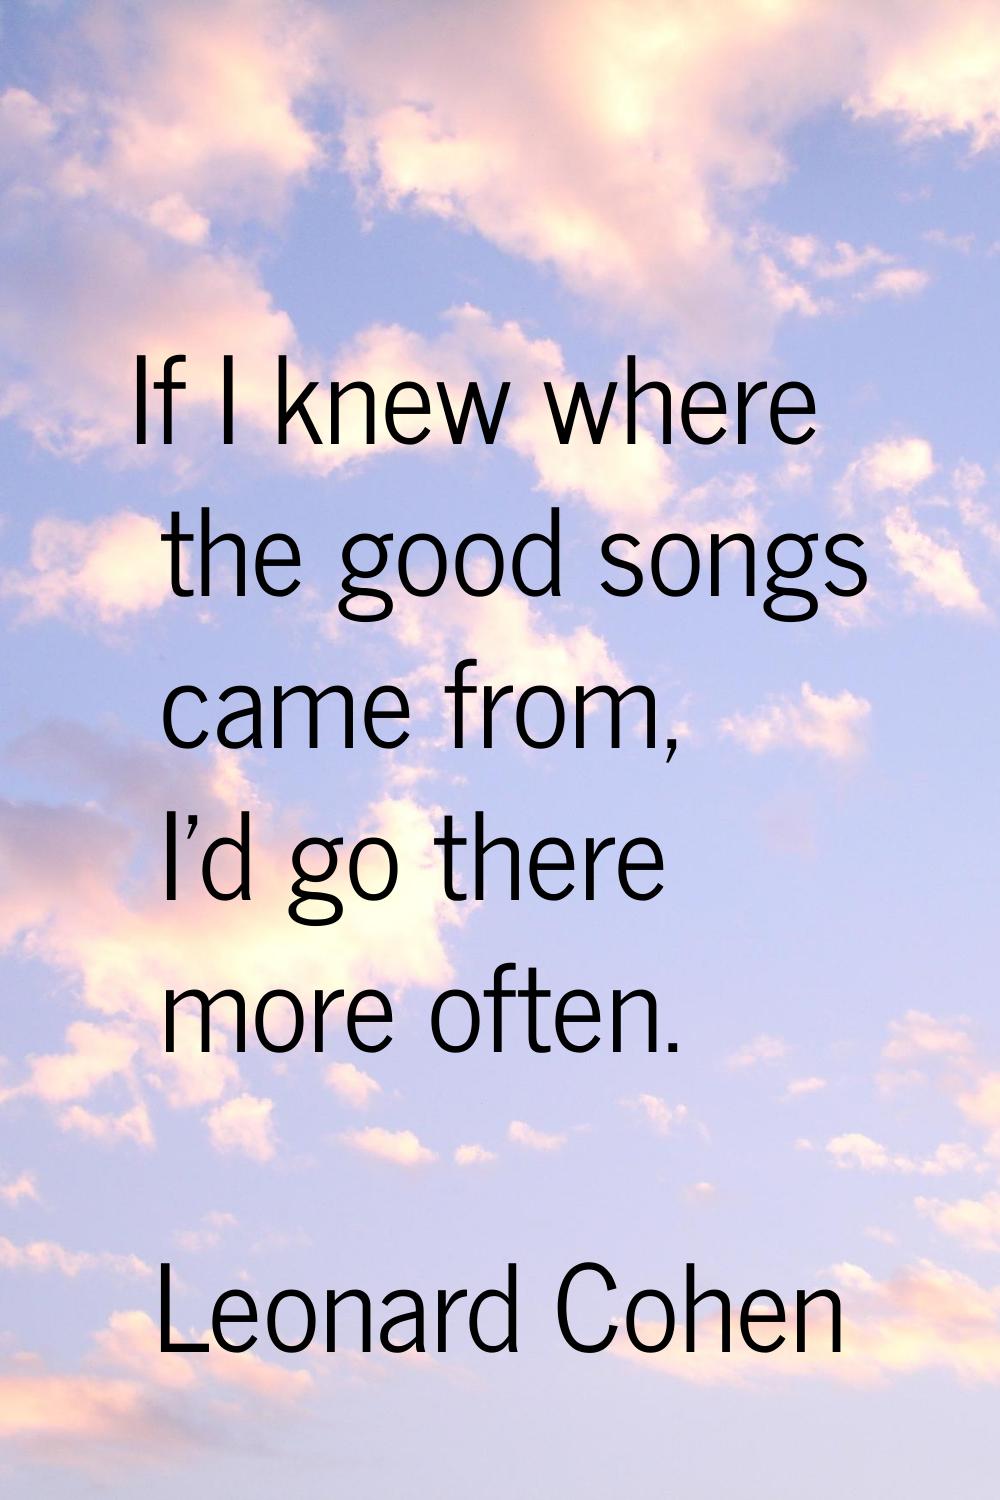 If I knew where the good songs came from, I'd go there more often.